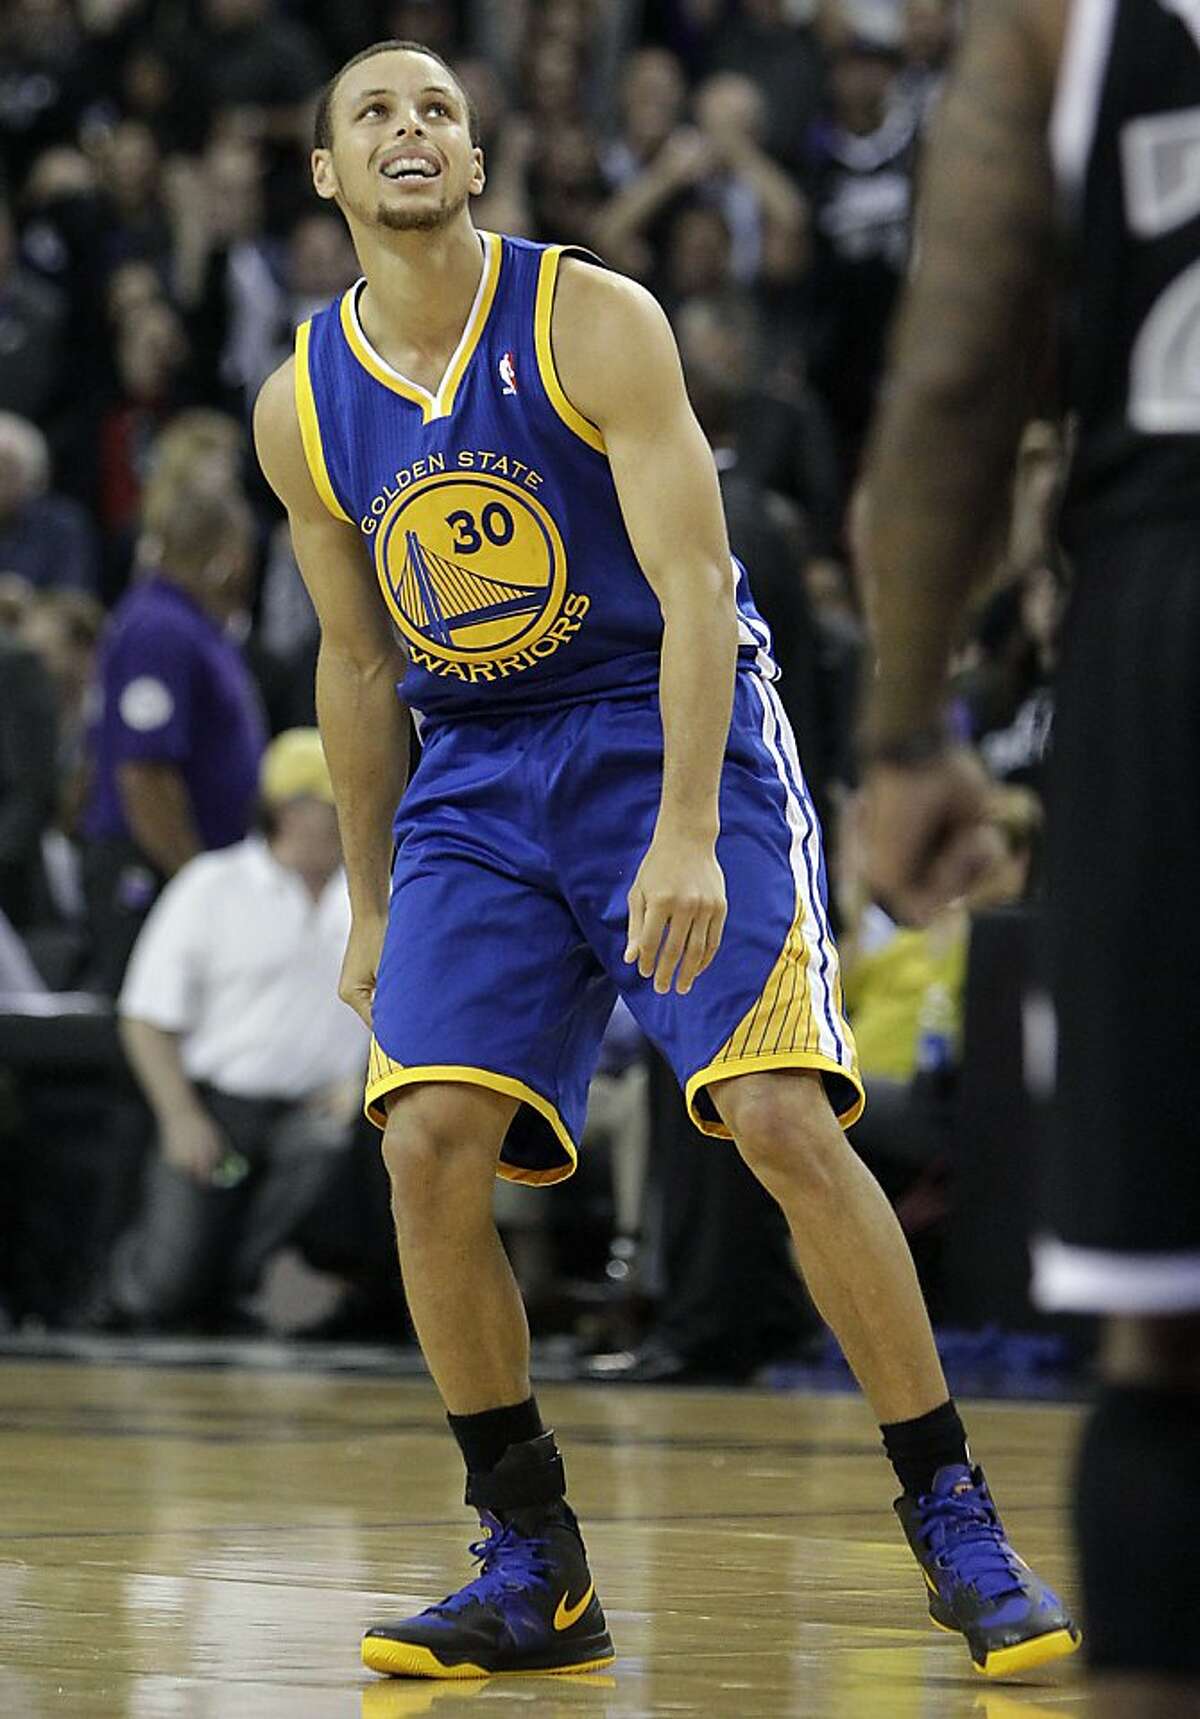 Golden State Warriors guard Stephen Curry watches his missed shot against the Sacramento Kings basket during the final moments of an NBA basketball game in Sacramento, Calif., Monday, Nov. 5, 2012. The Kings won 94-92. (AP Photo/Rich Pedroncelli)